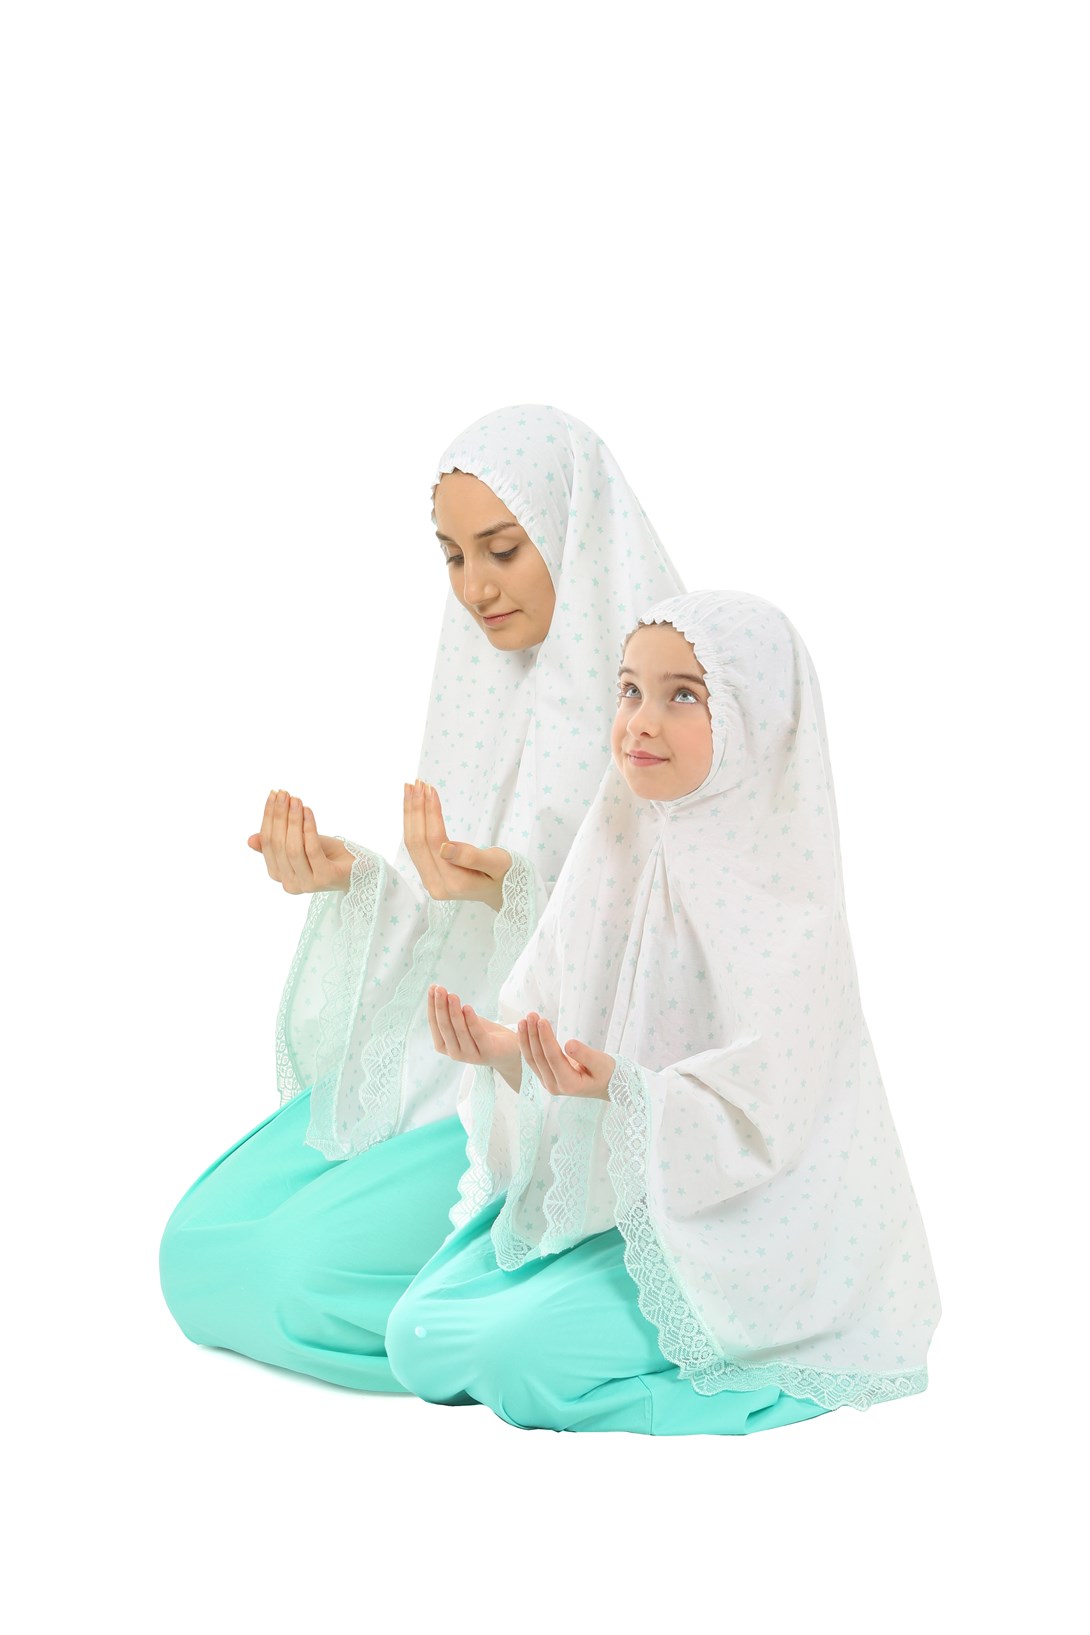 Mother Daughter Practical Prayer Dress Zippered Cotton Mint Printed Sold Separately